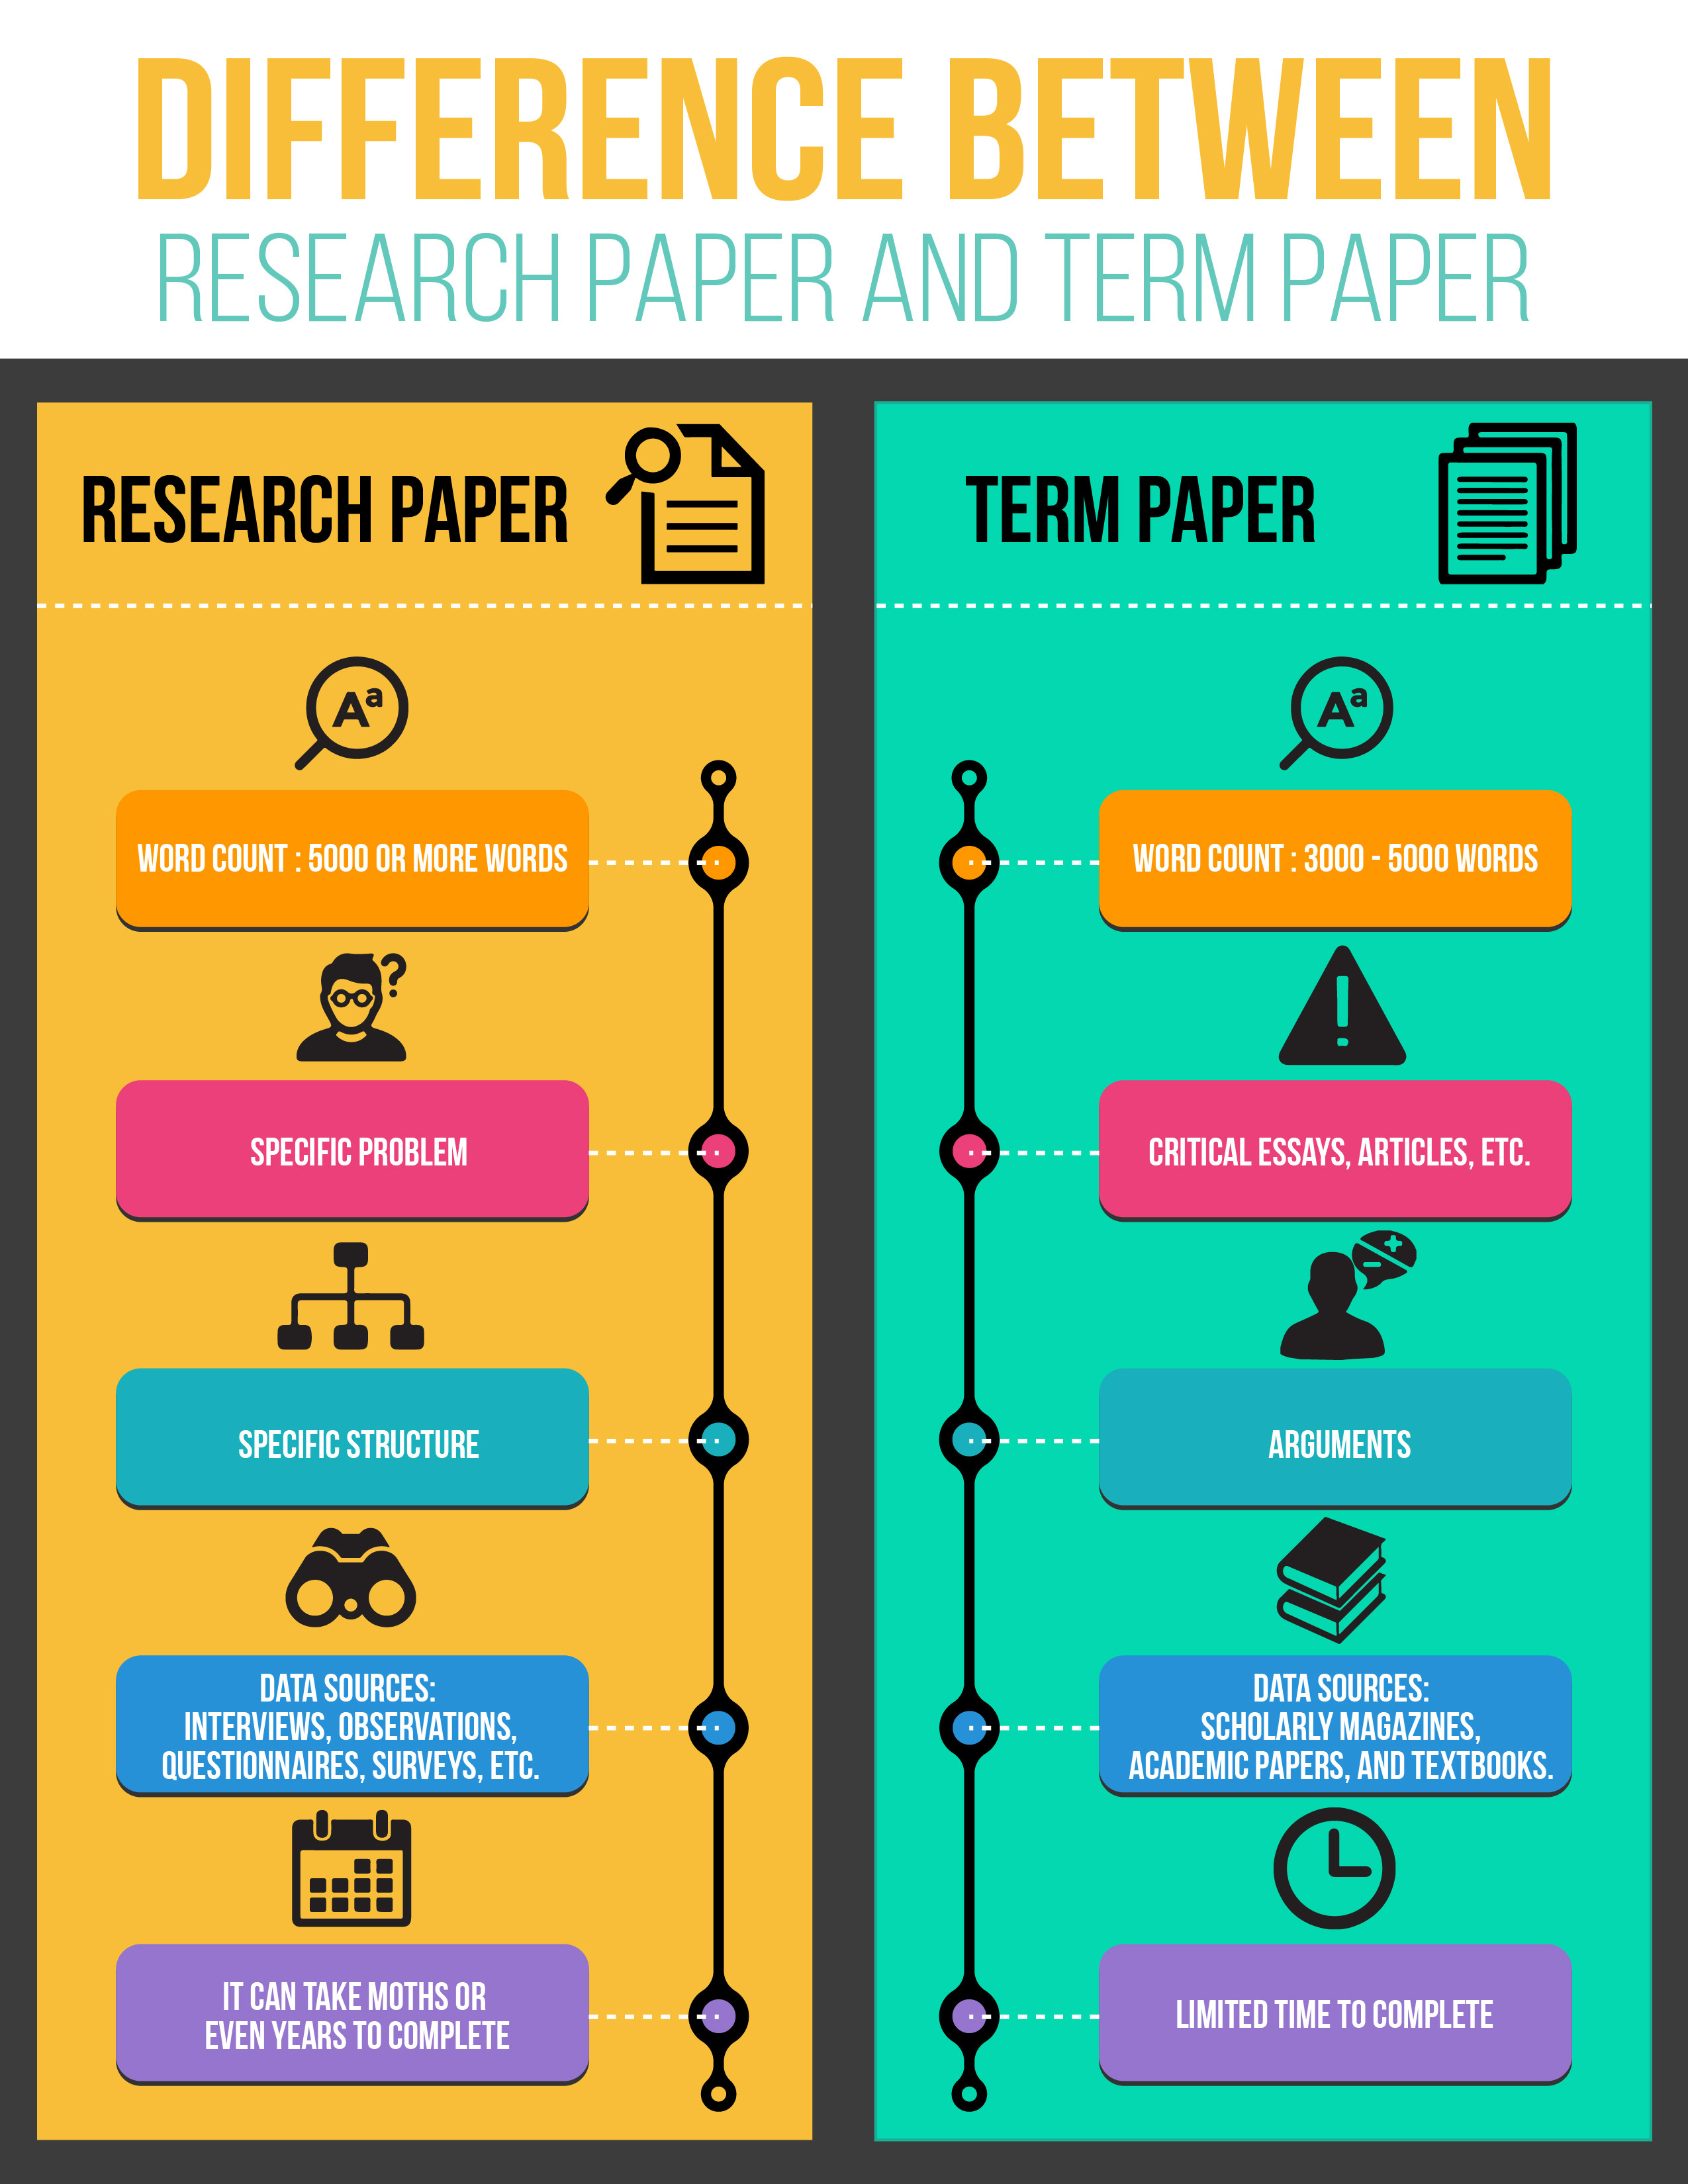 What is a Term Paper?